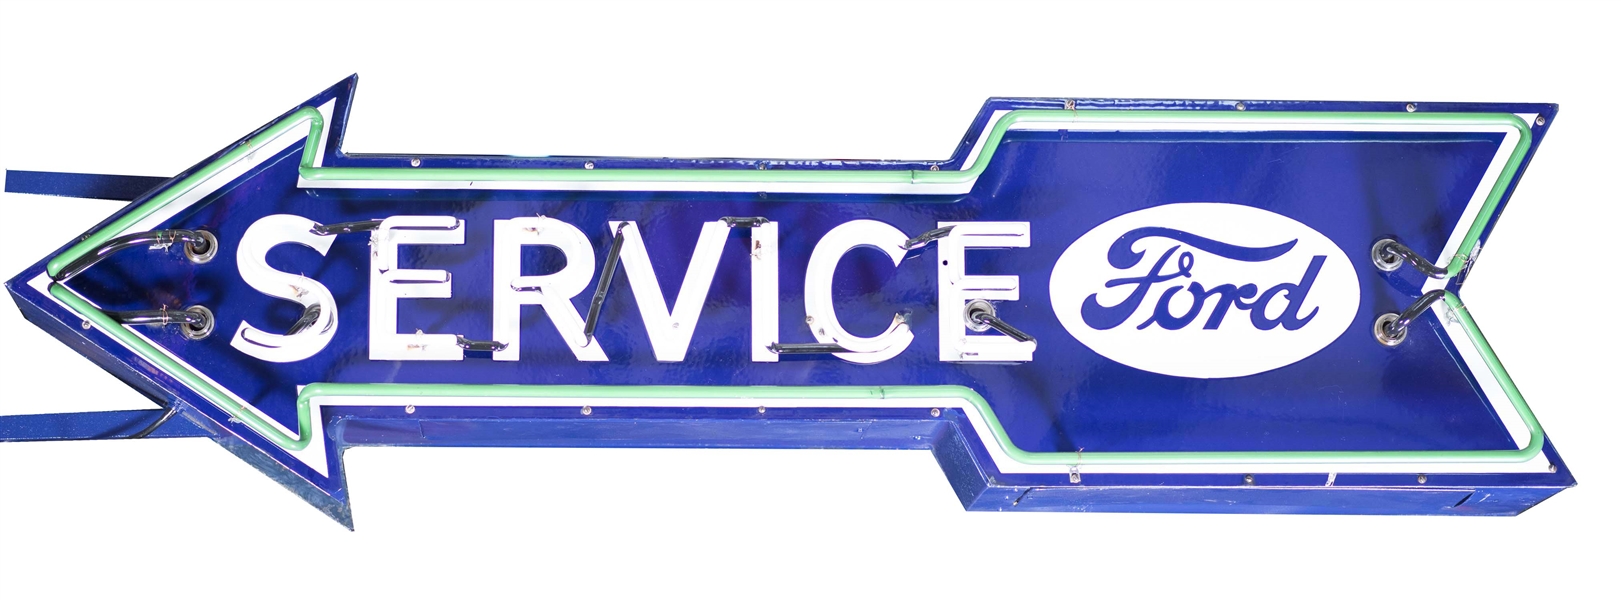 COMPLETE FORD SERVICE ARROW PORCELAIN NEON SIGN.